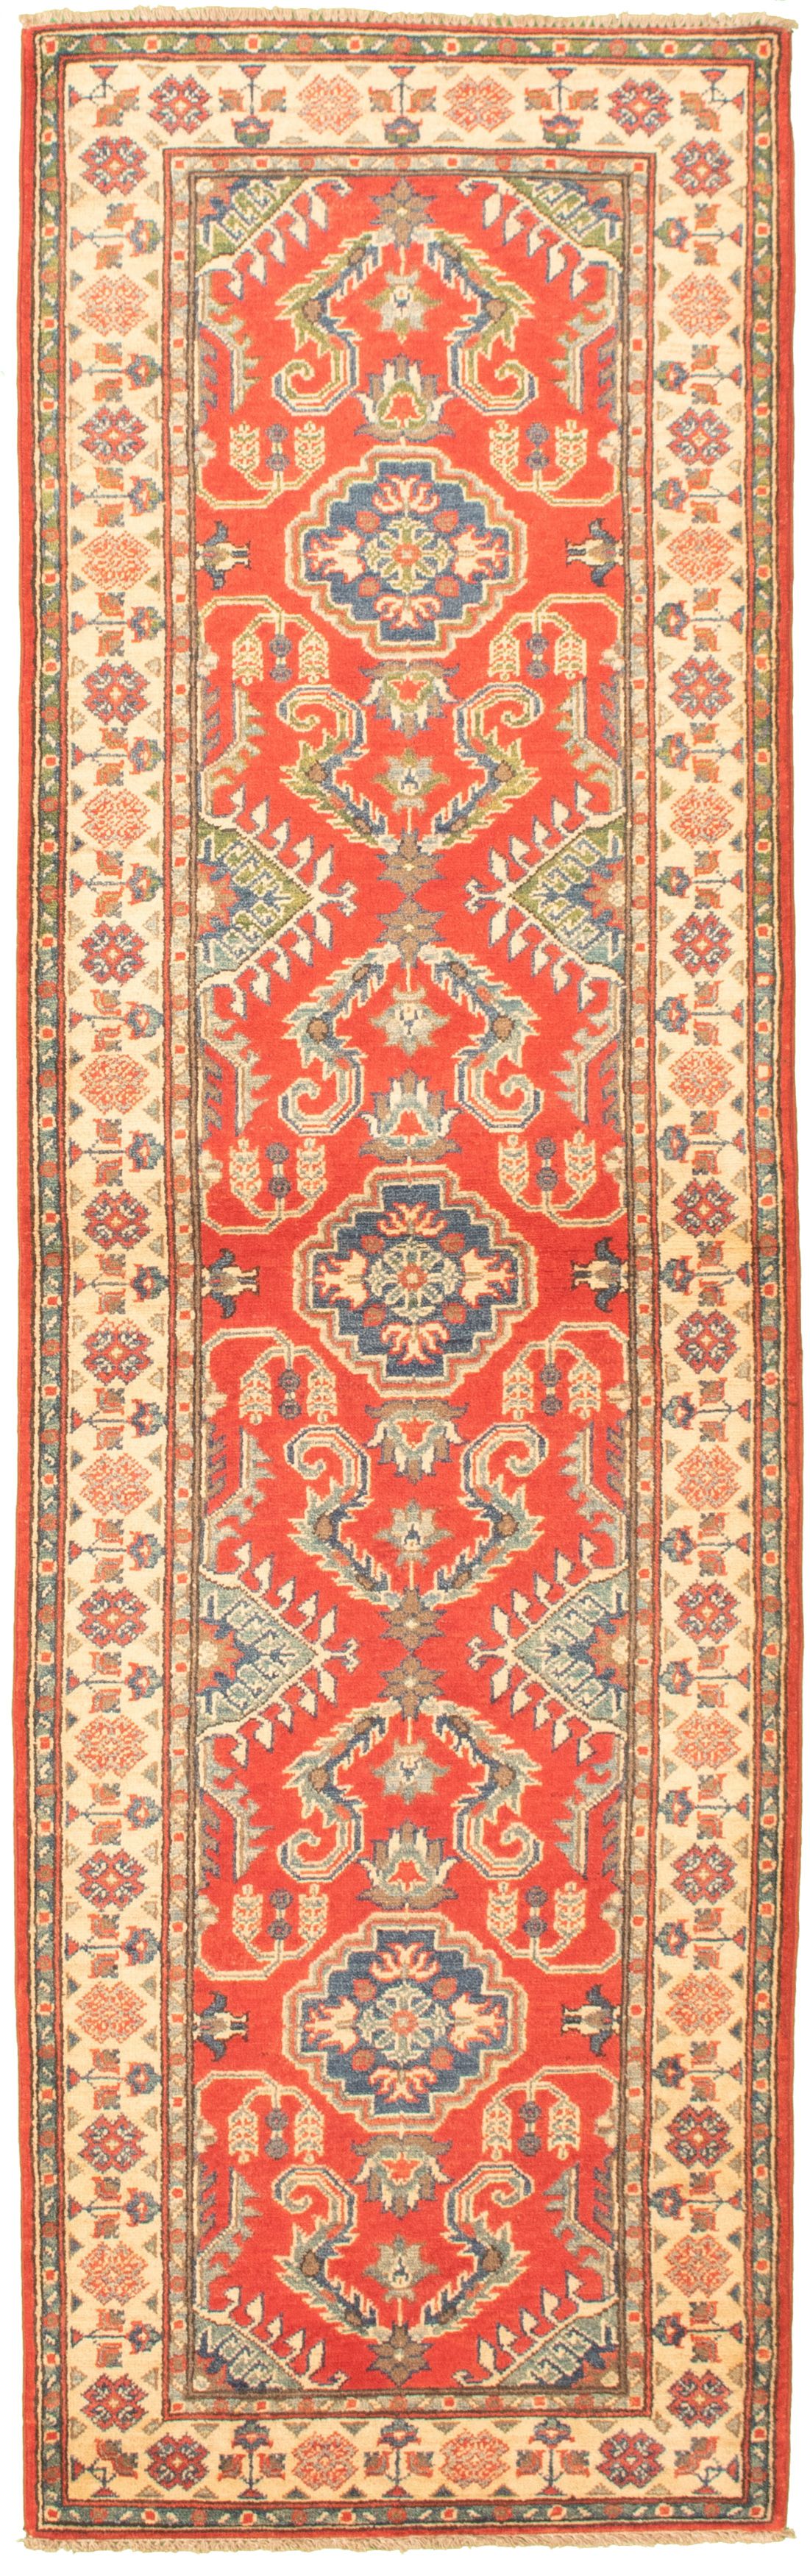 Hand-knotted Finest Gazni Red Wool Rug 2'7" x 9'8"  Size: 2'7" x 9'8"  